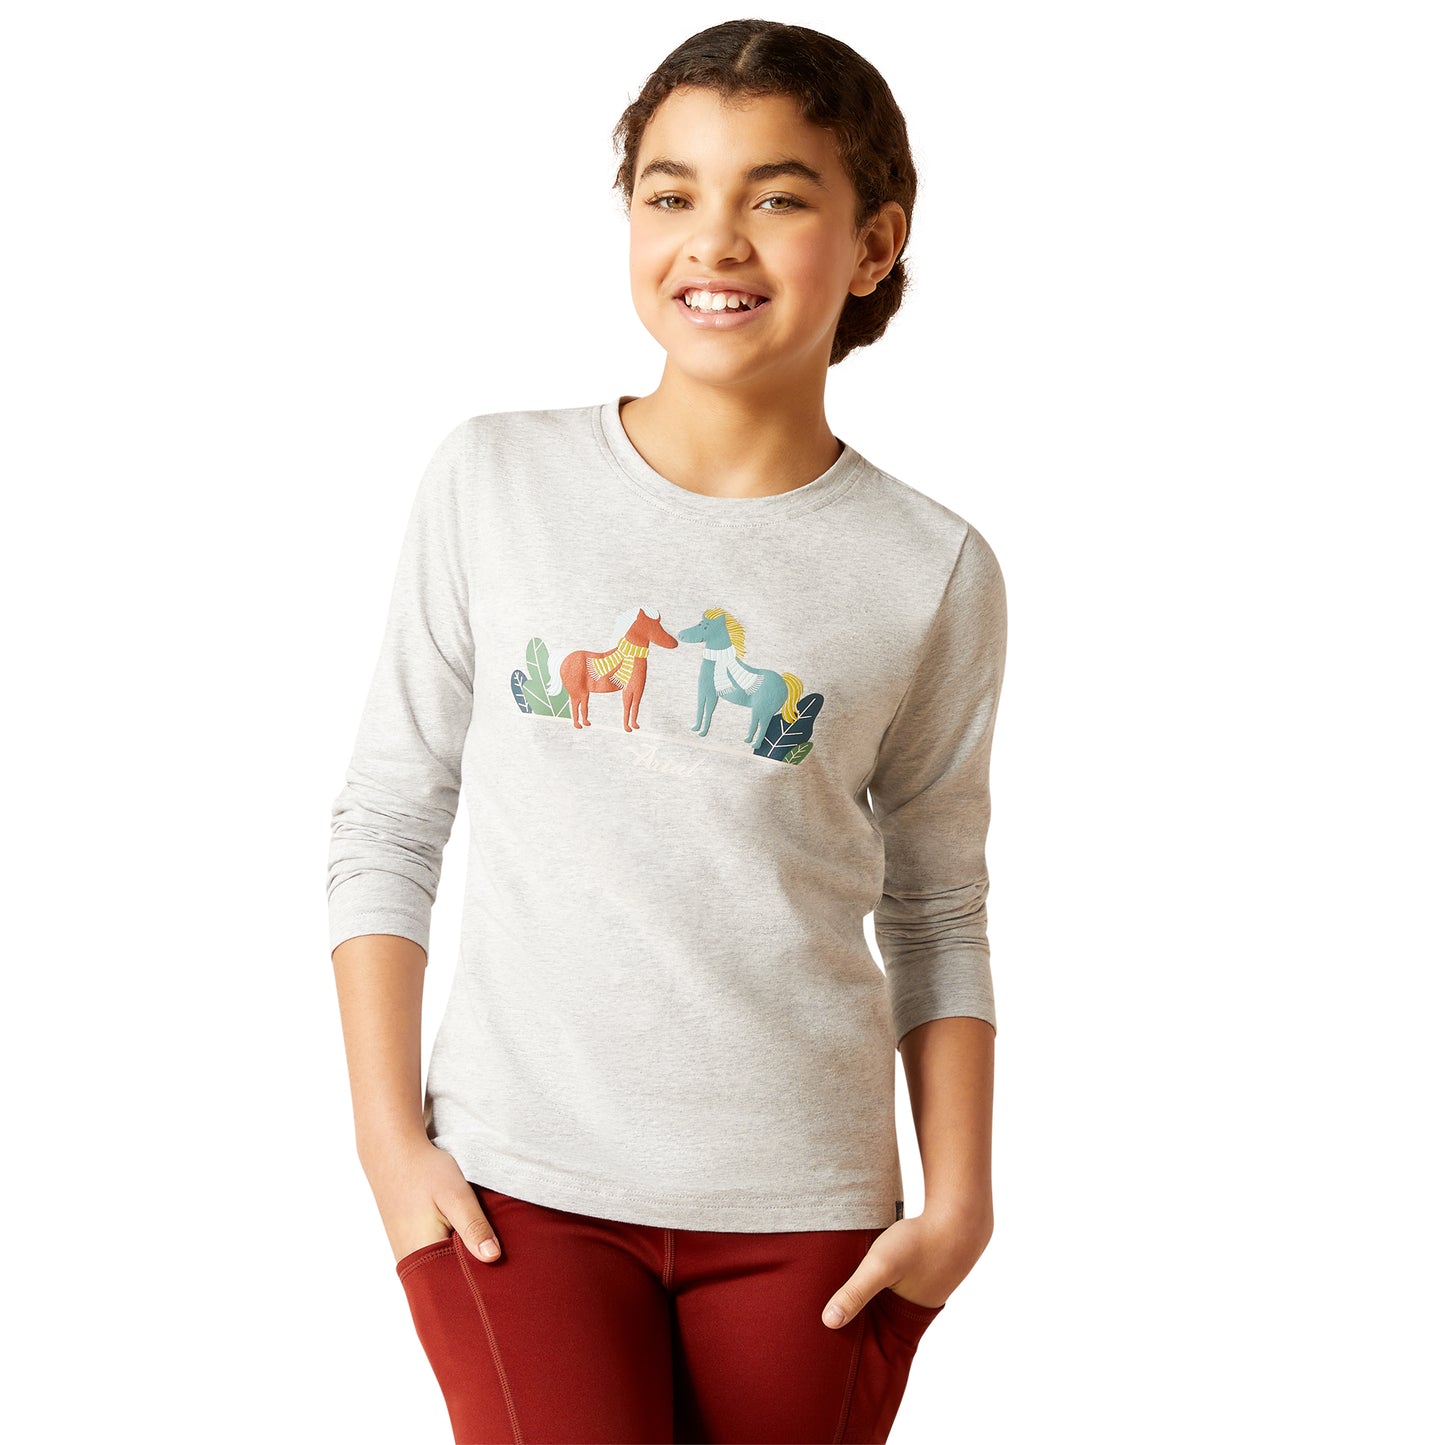 Ariat Youth Girl's Winter Fashions Long Sleeve Heather Grey T-Shirt 10046497